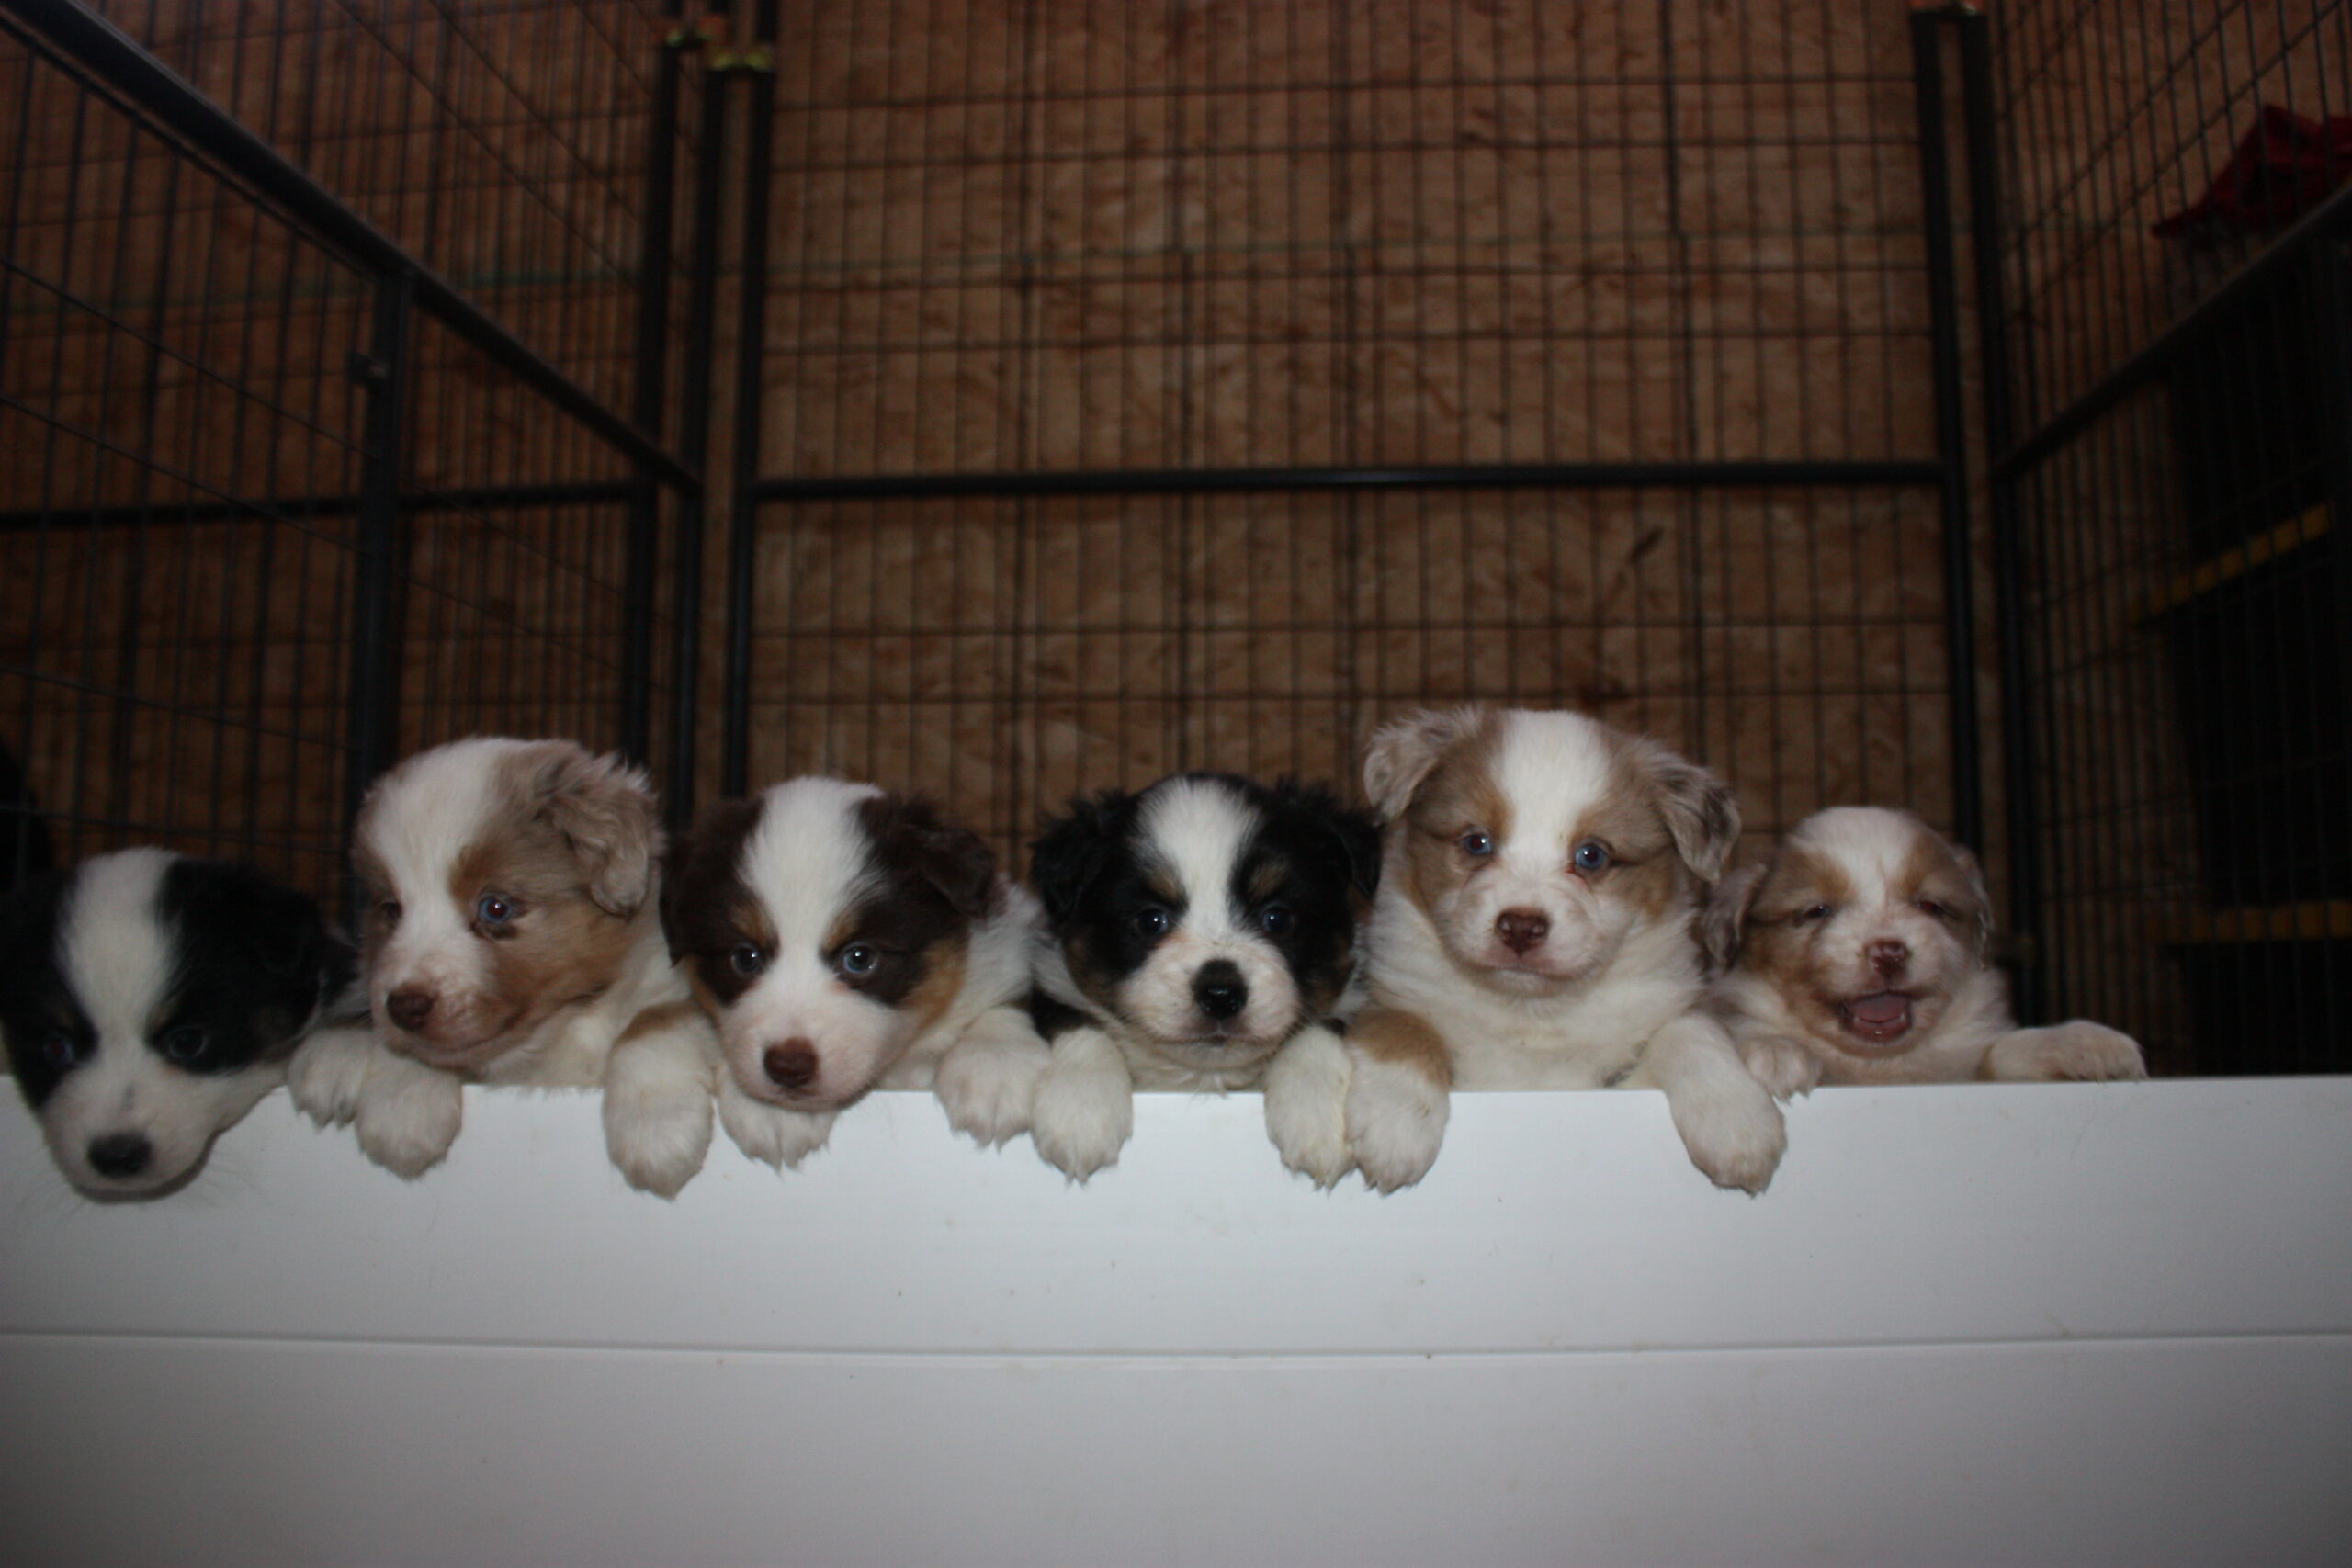 Border Collie Adoption: Border Collie Puppies for Sale and Adoption 